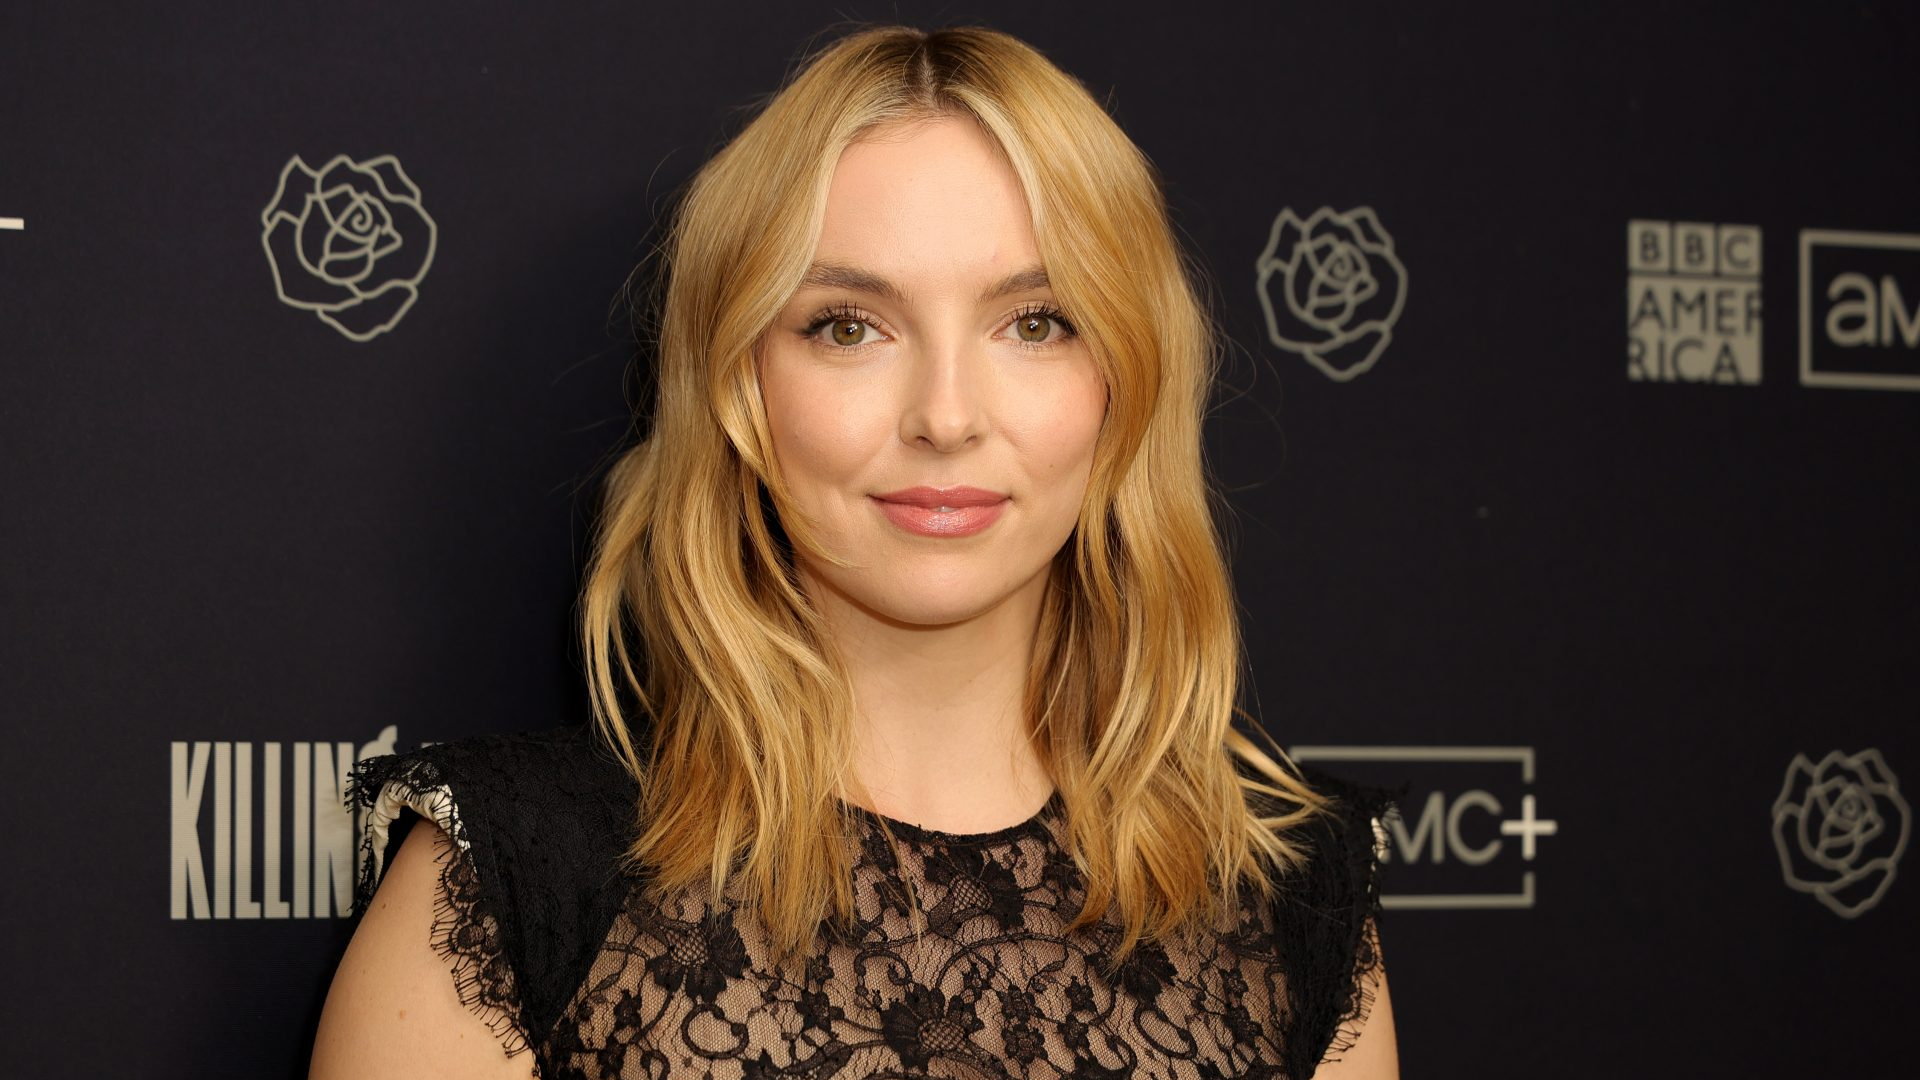 HBO's Big Swiss: Jodie Comer confirmed to lead cast of new show